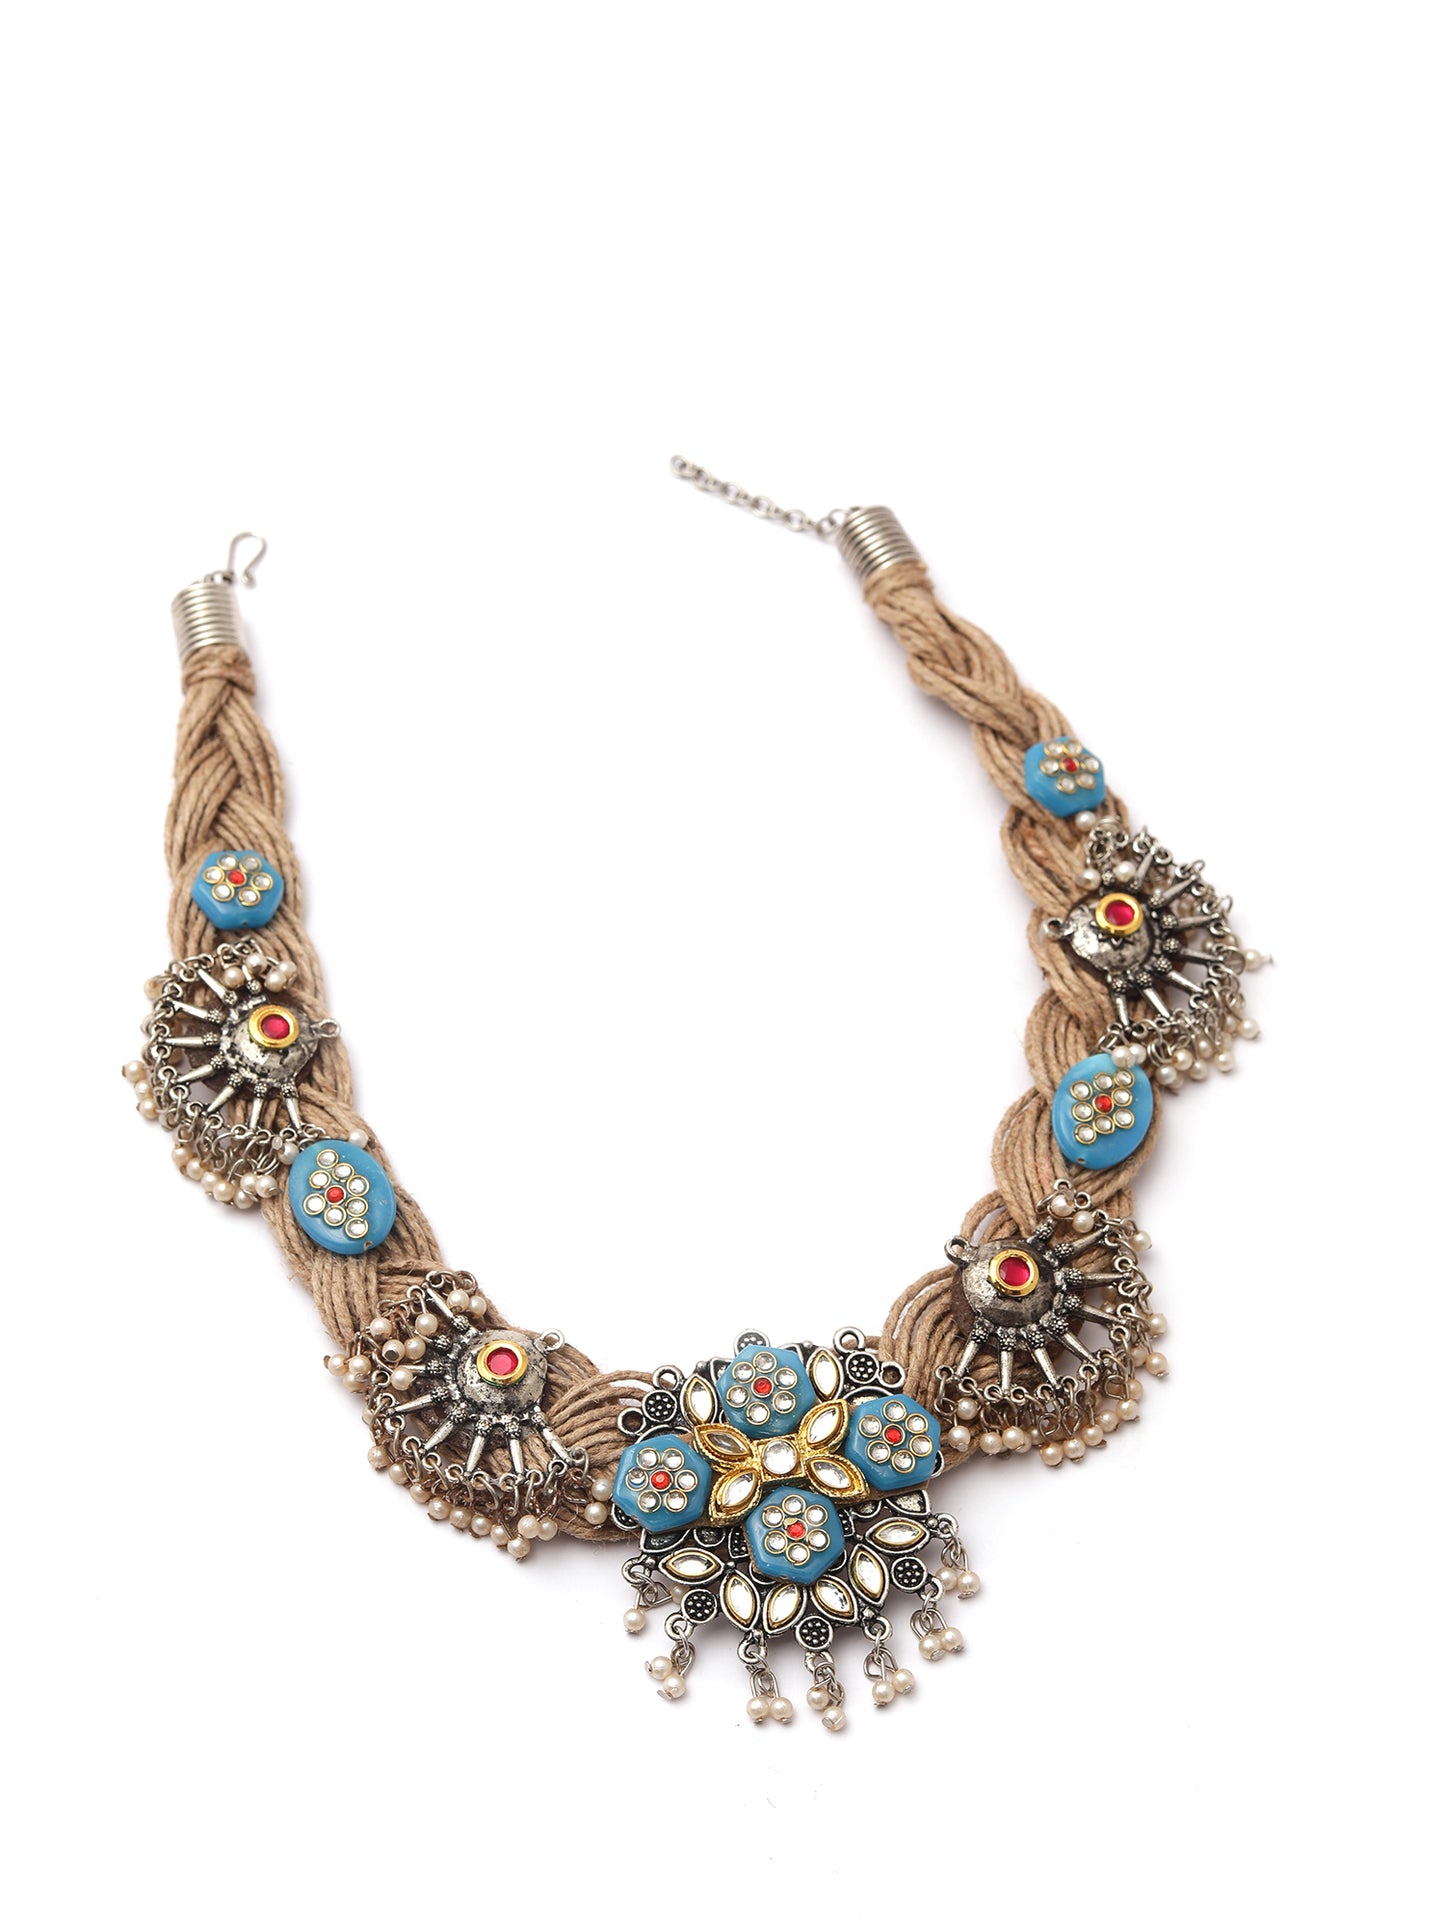 The Abloom Threaded Yarn Jute Necklace